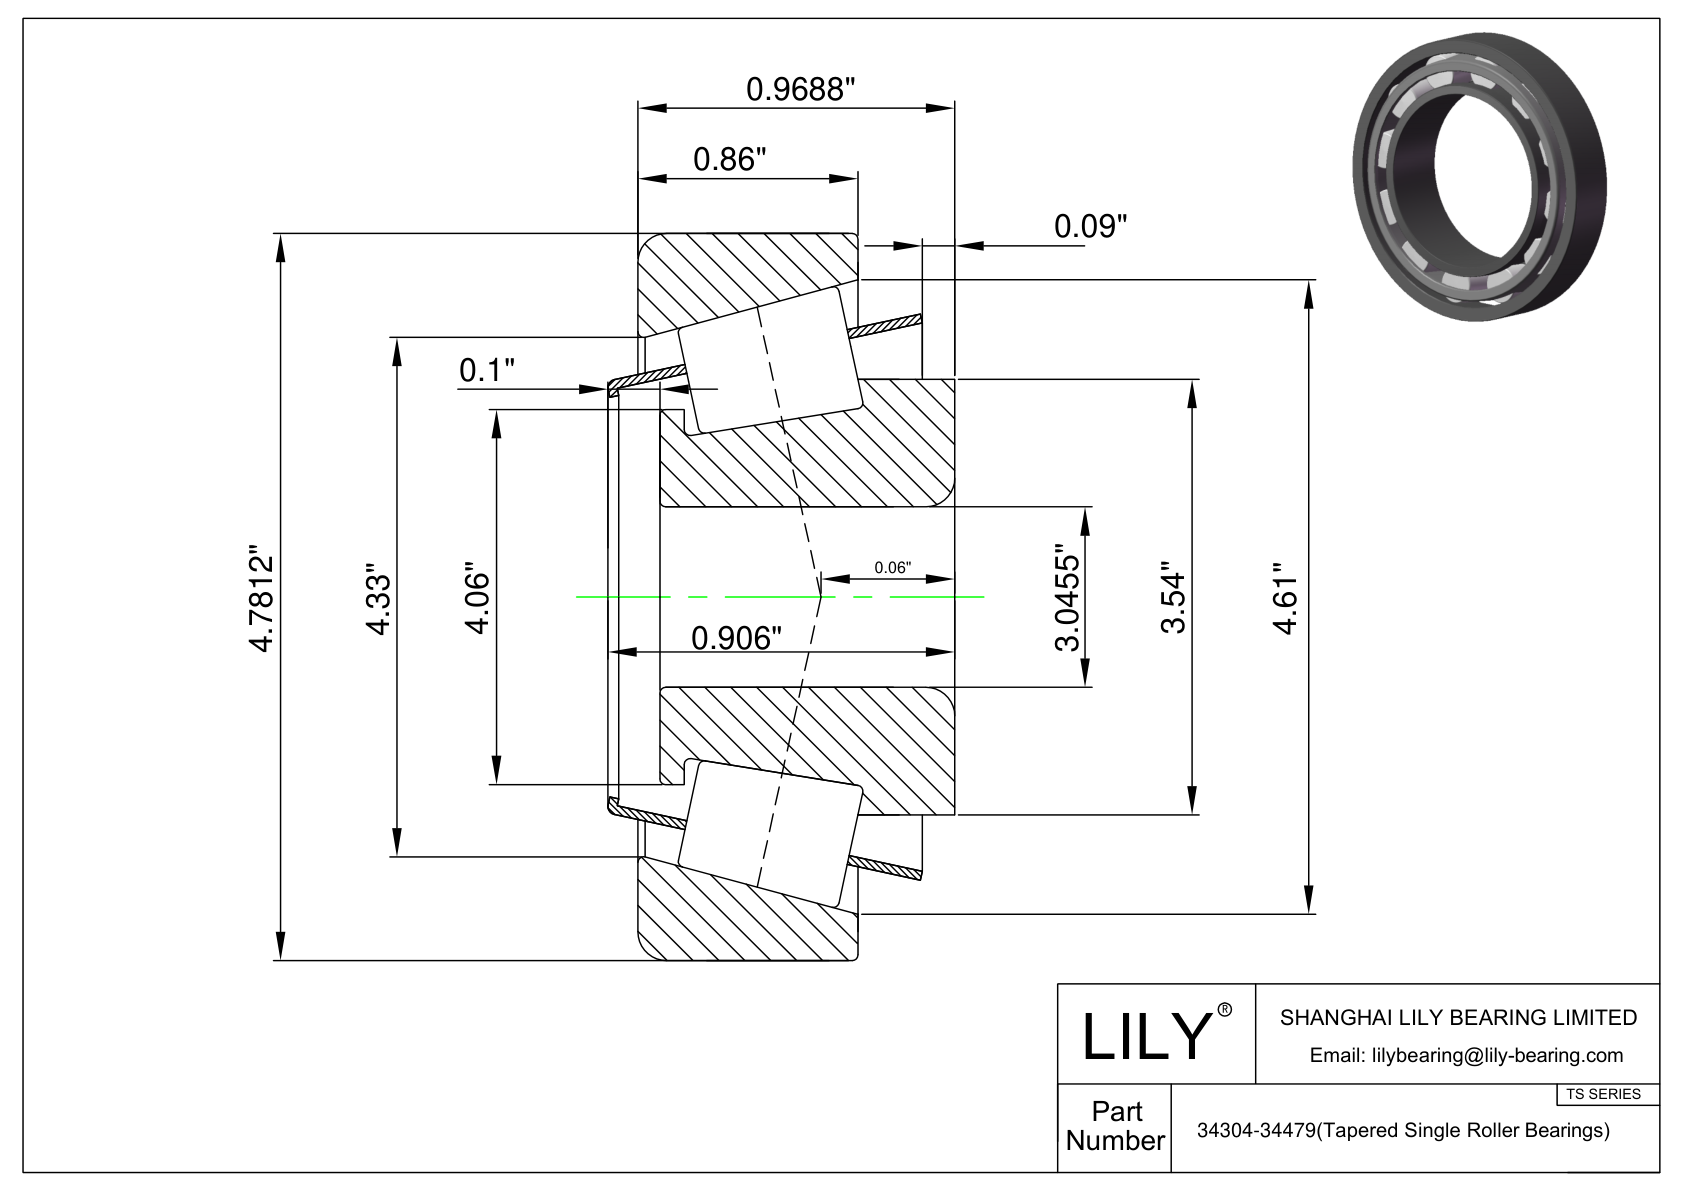 34304-34479 TS (Tapered Single Roller Bearings) (Imperial) cad drawing